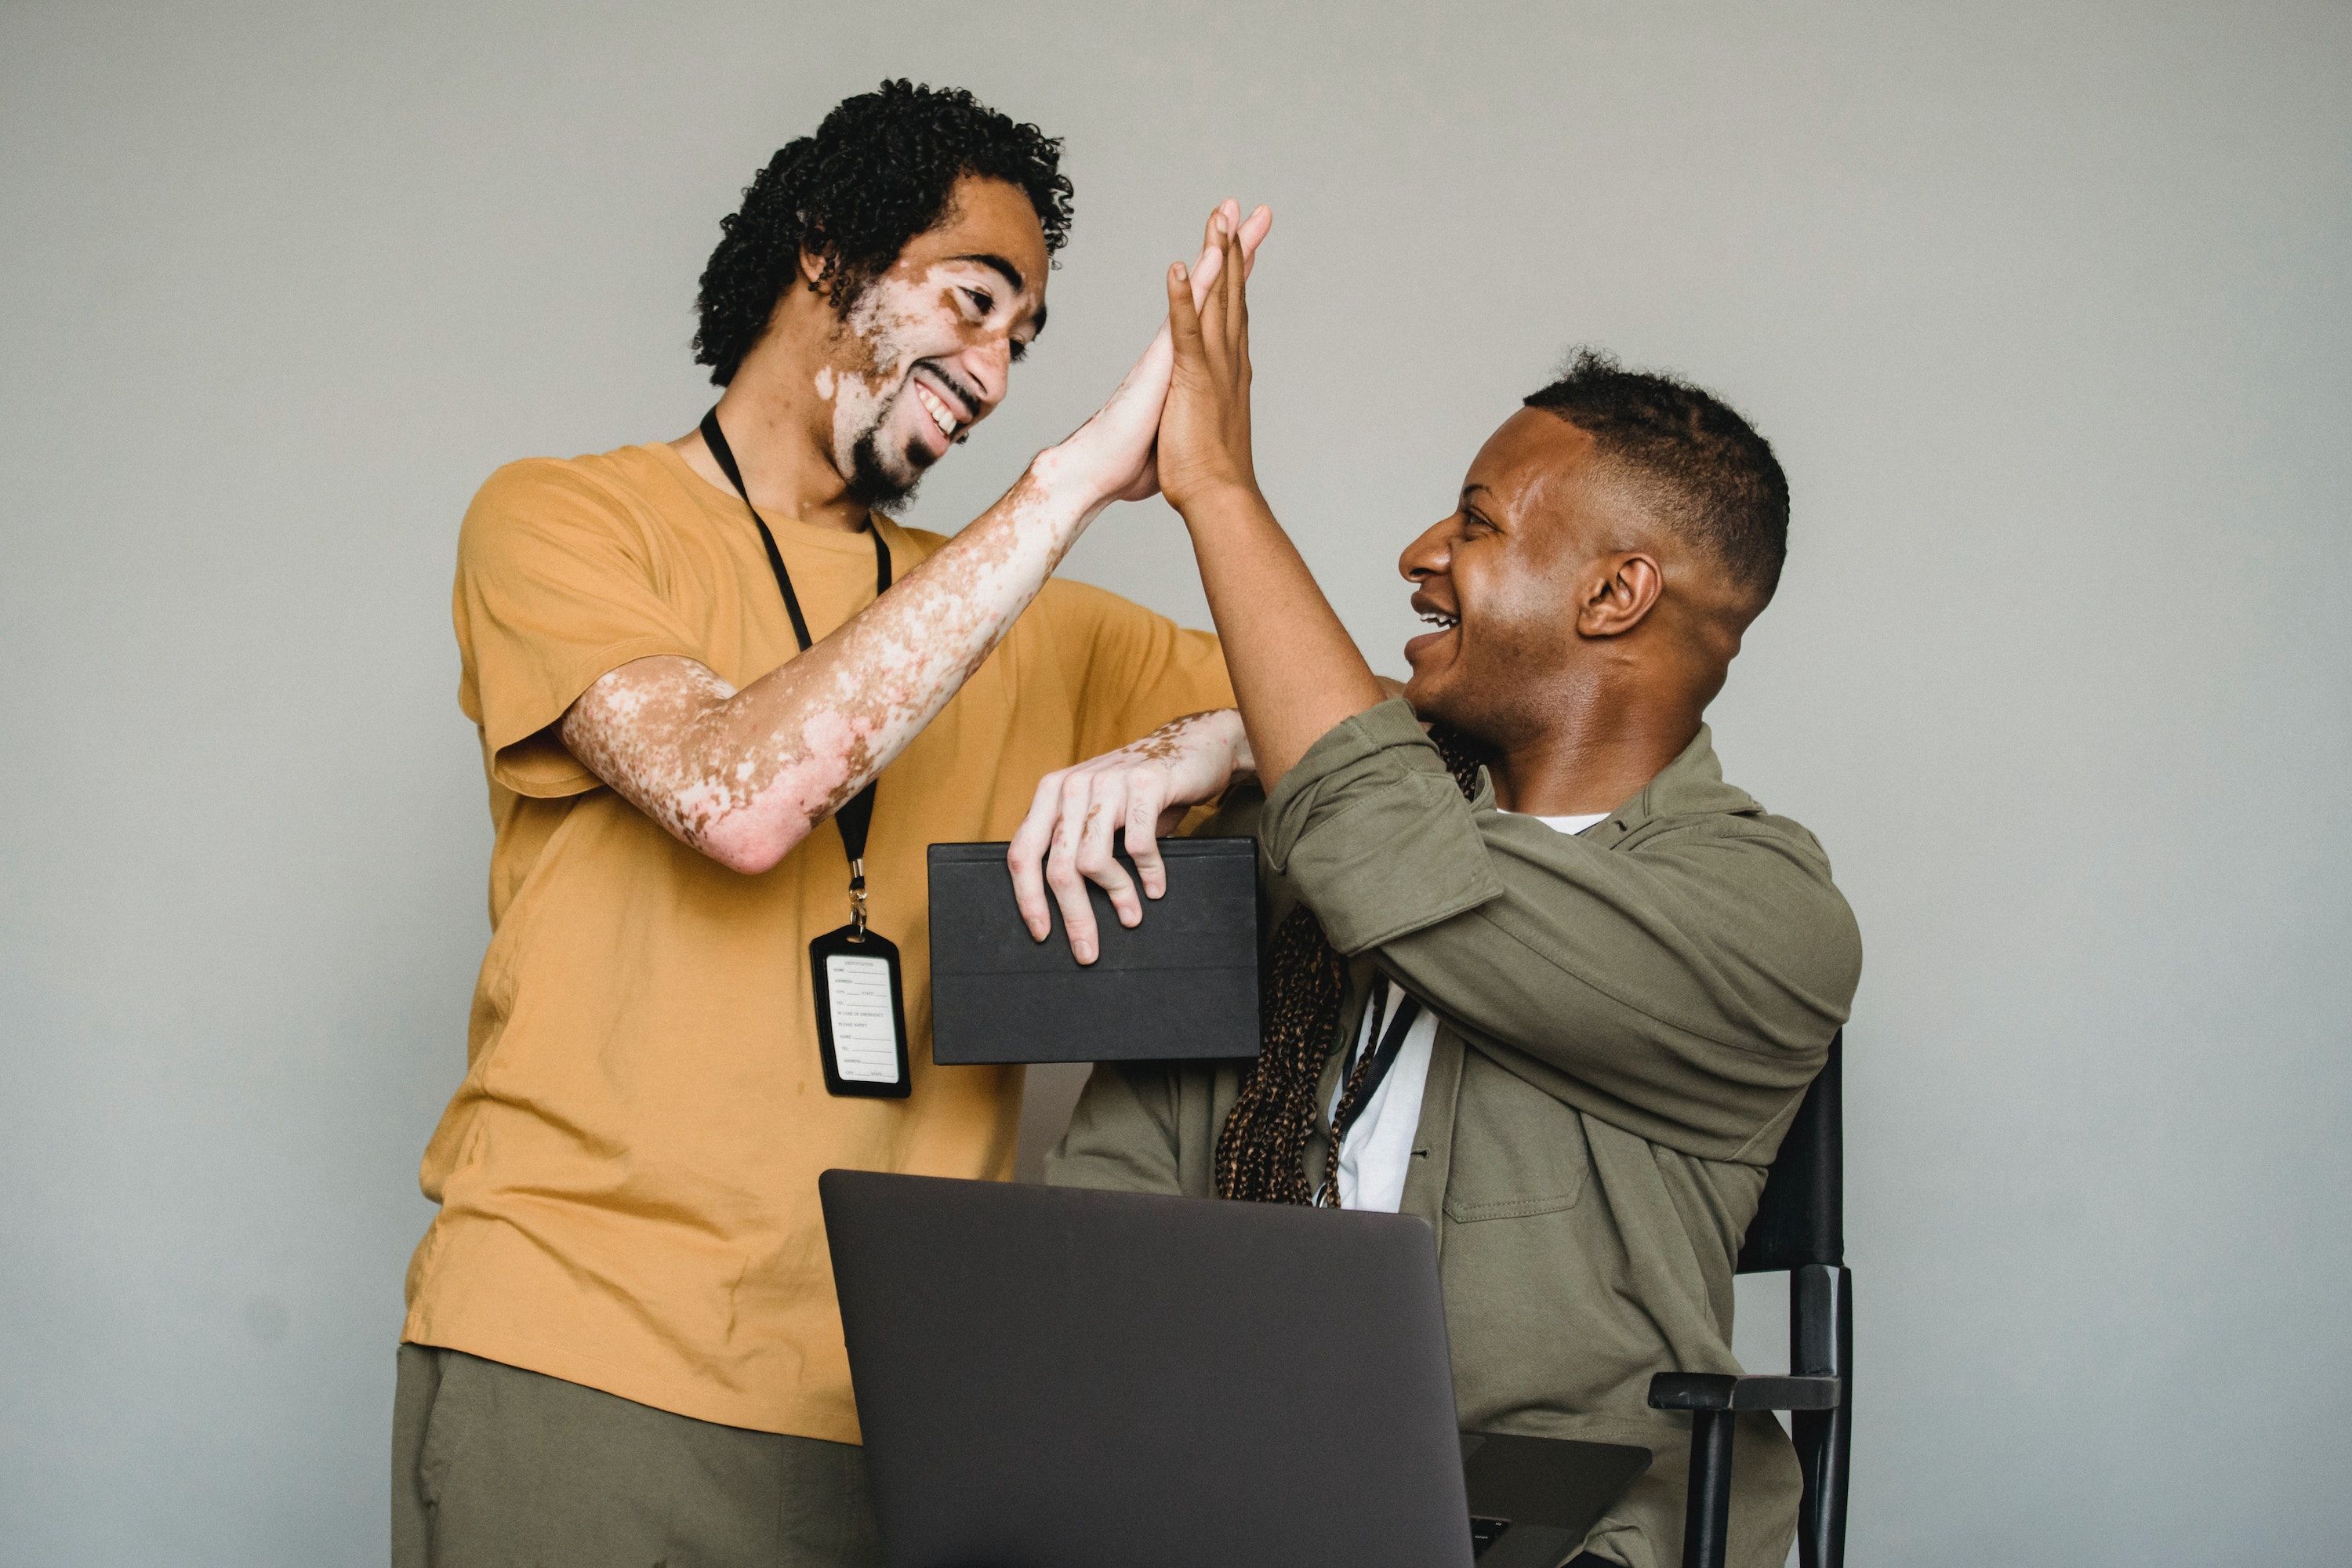 Two men smile and high-five each other, an open laptop in front of them